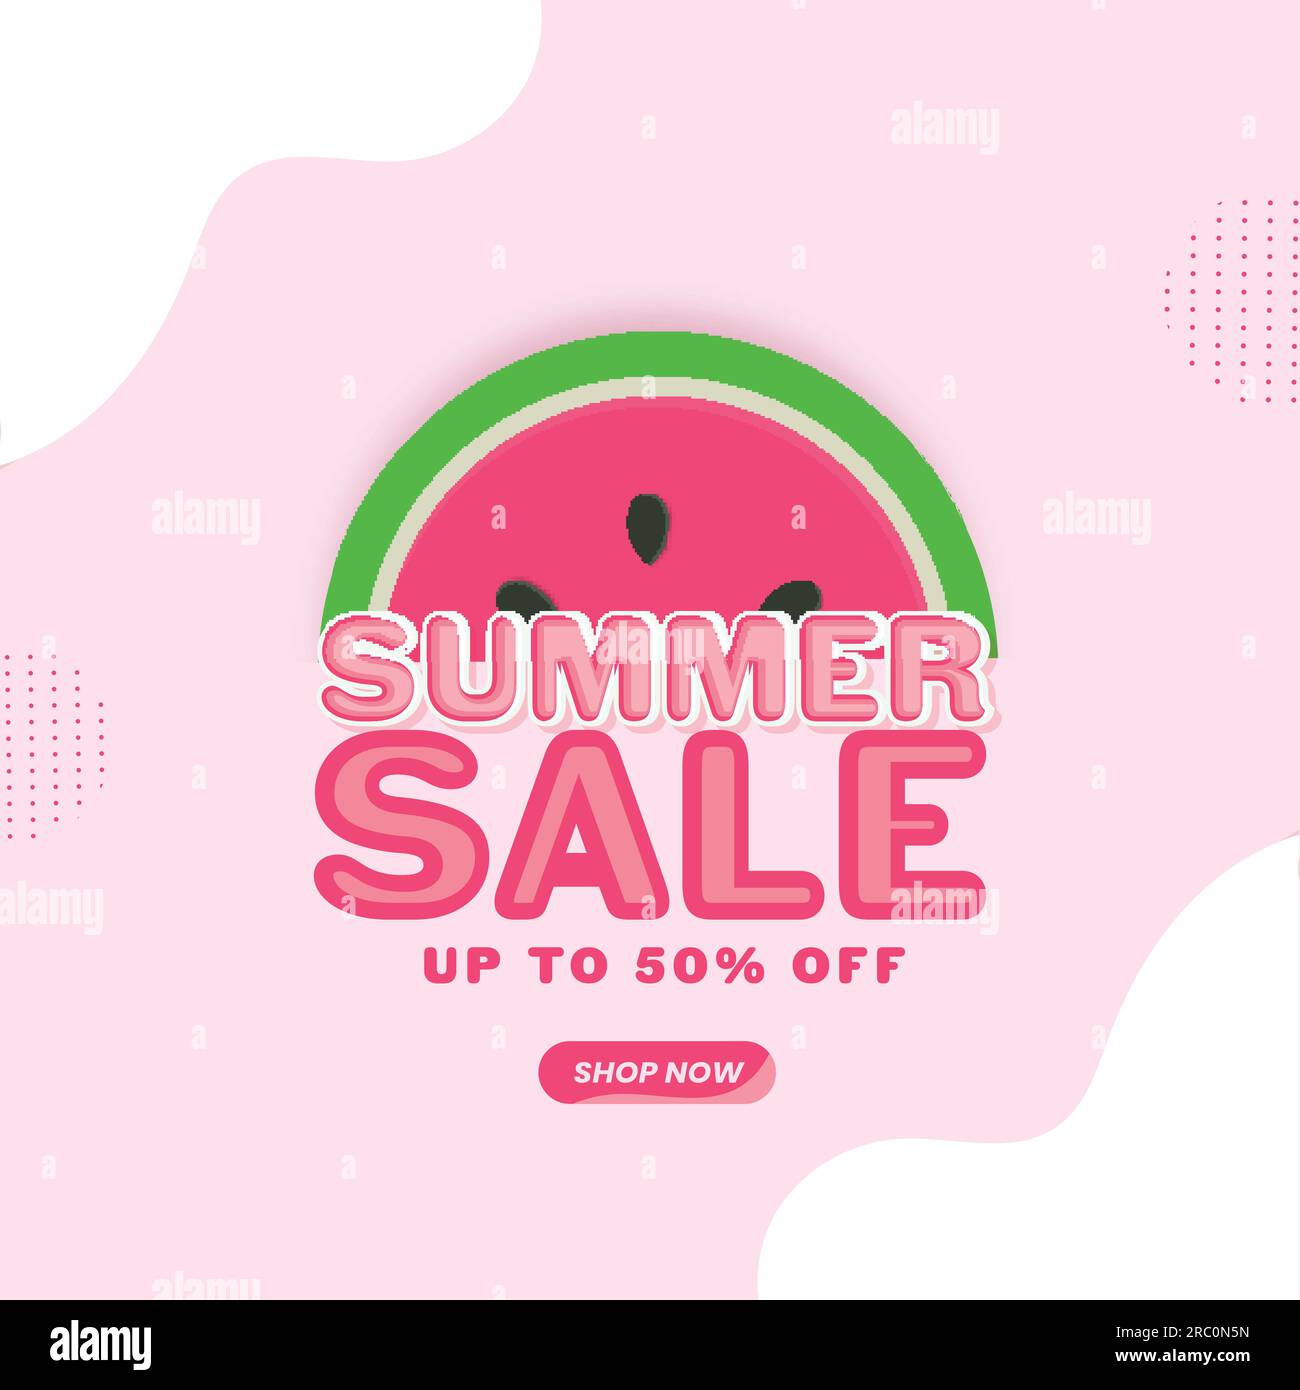 Summer Sale Poster Design With 50% Discount Offer And Watermelon Slice On Pink Background. Stock Vector